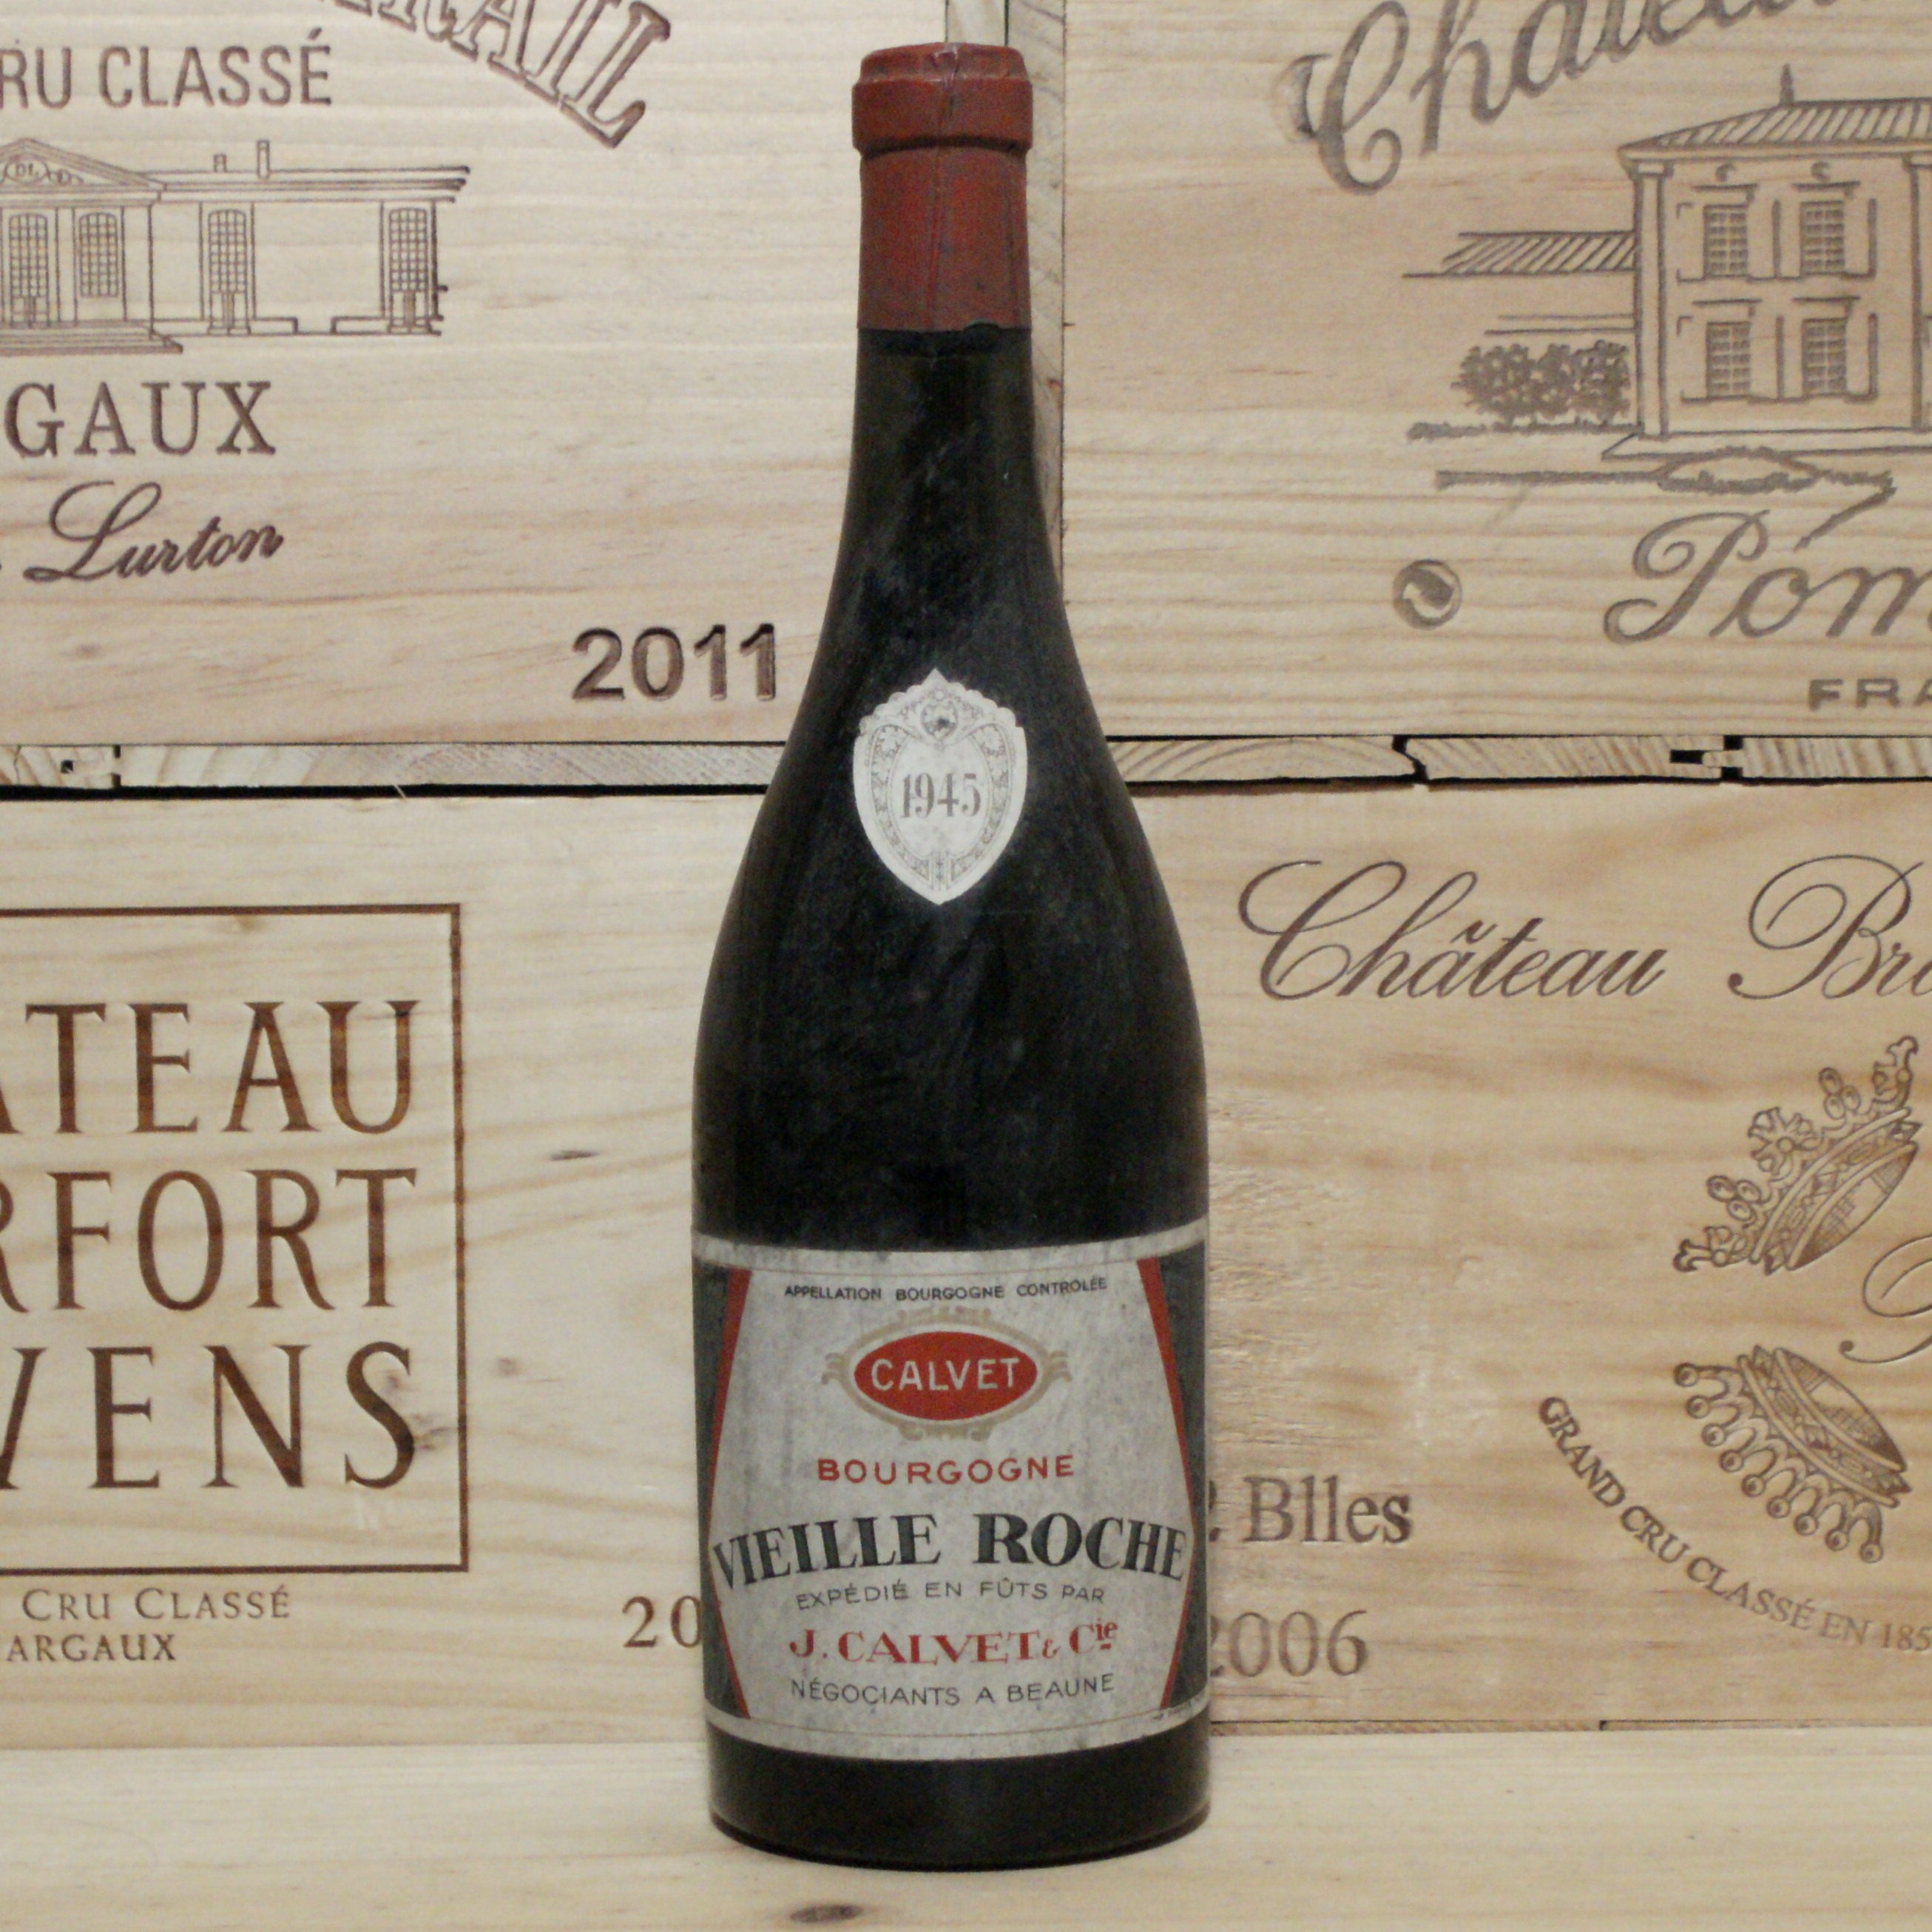 1945 Bourgogne Rouge Vieille Roche